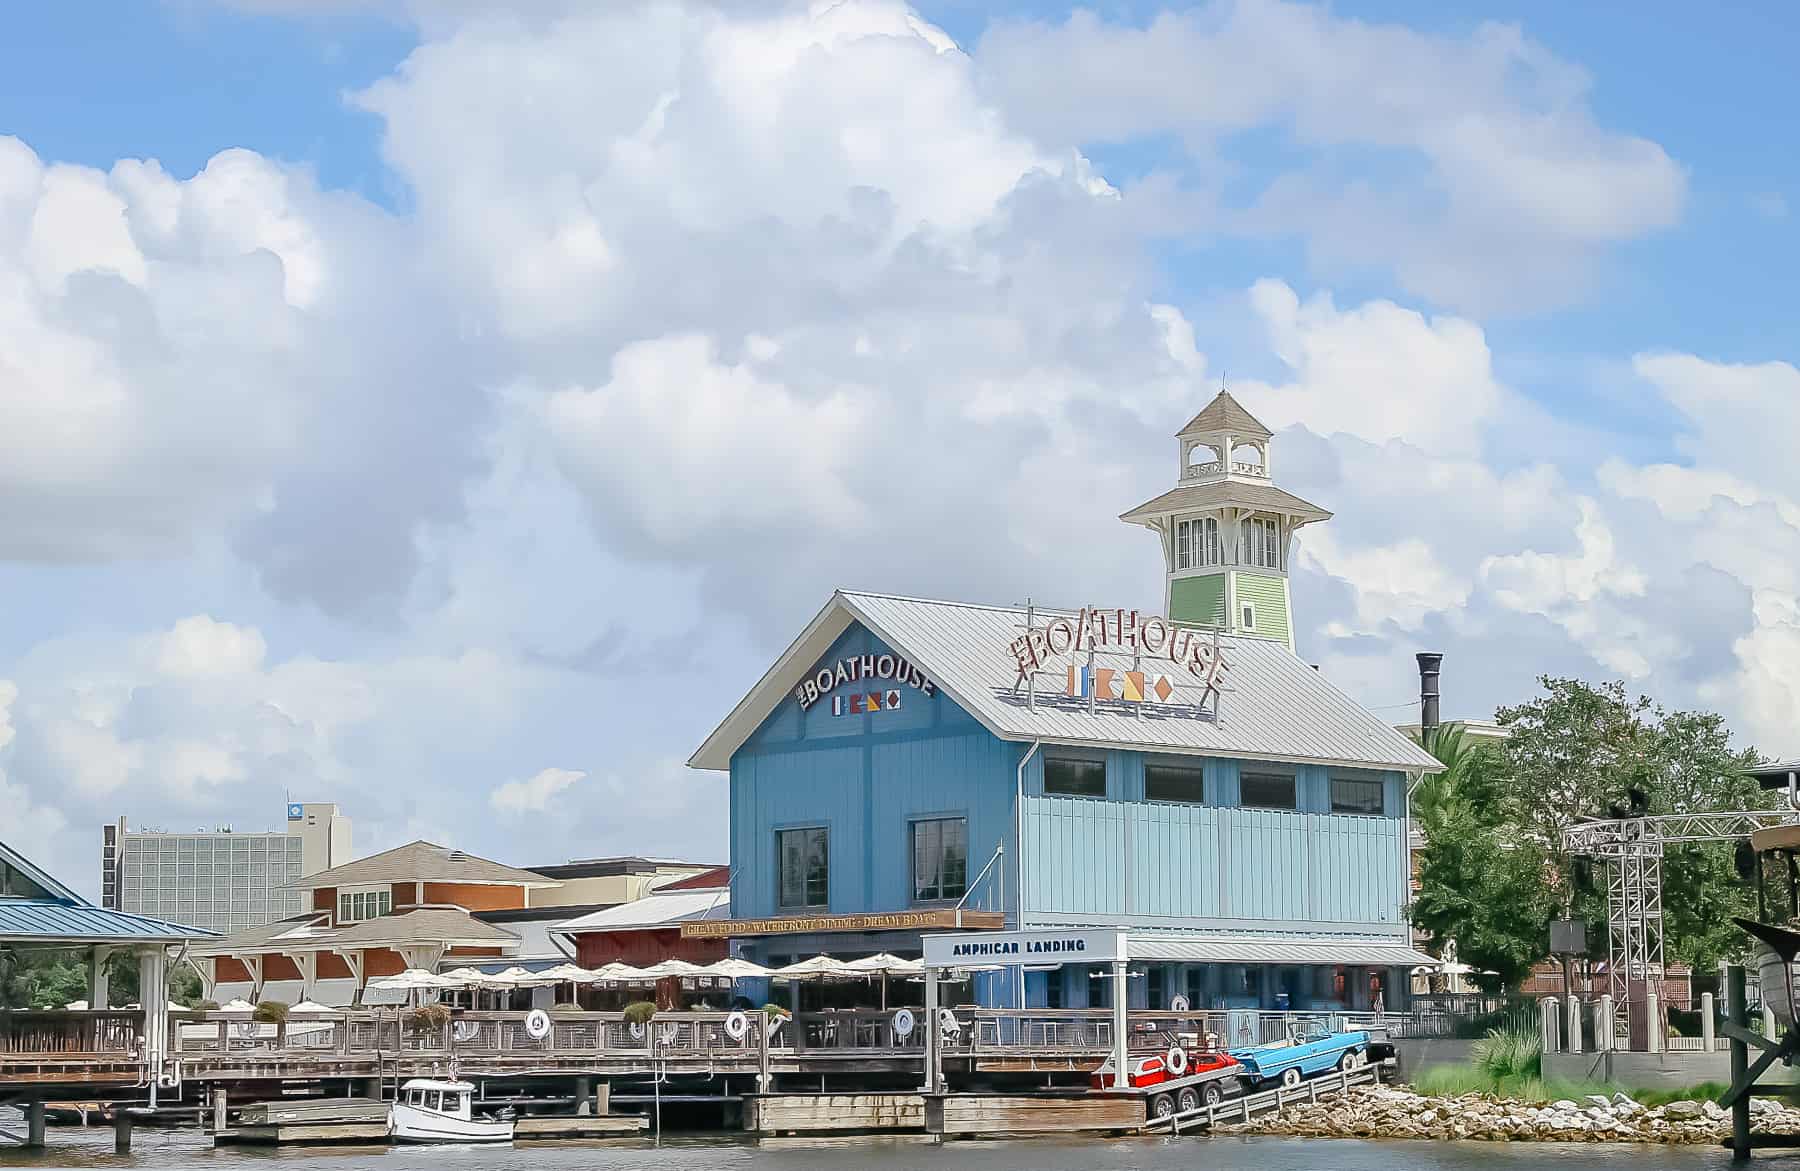 The Boathouse at Disney Springs from the water